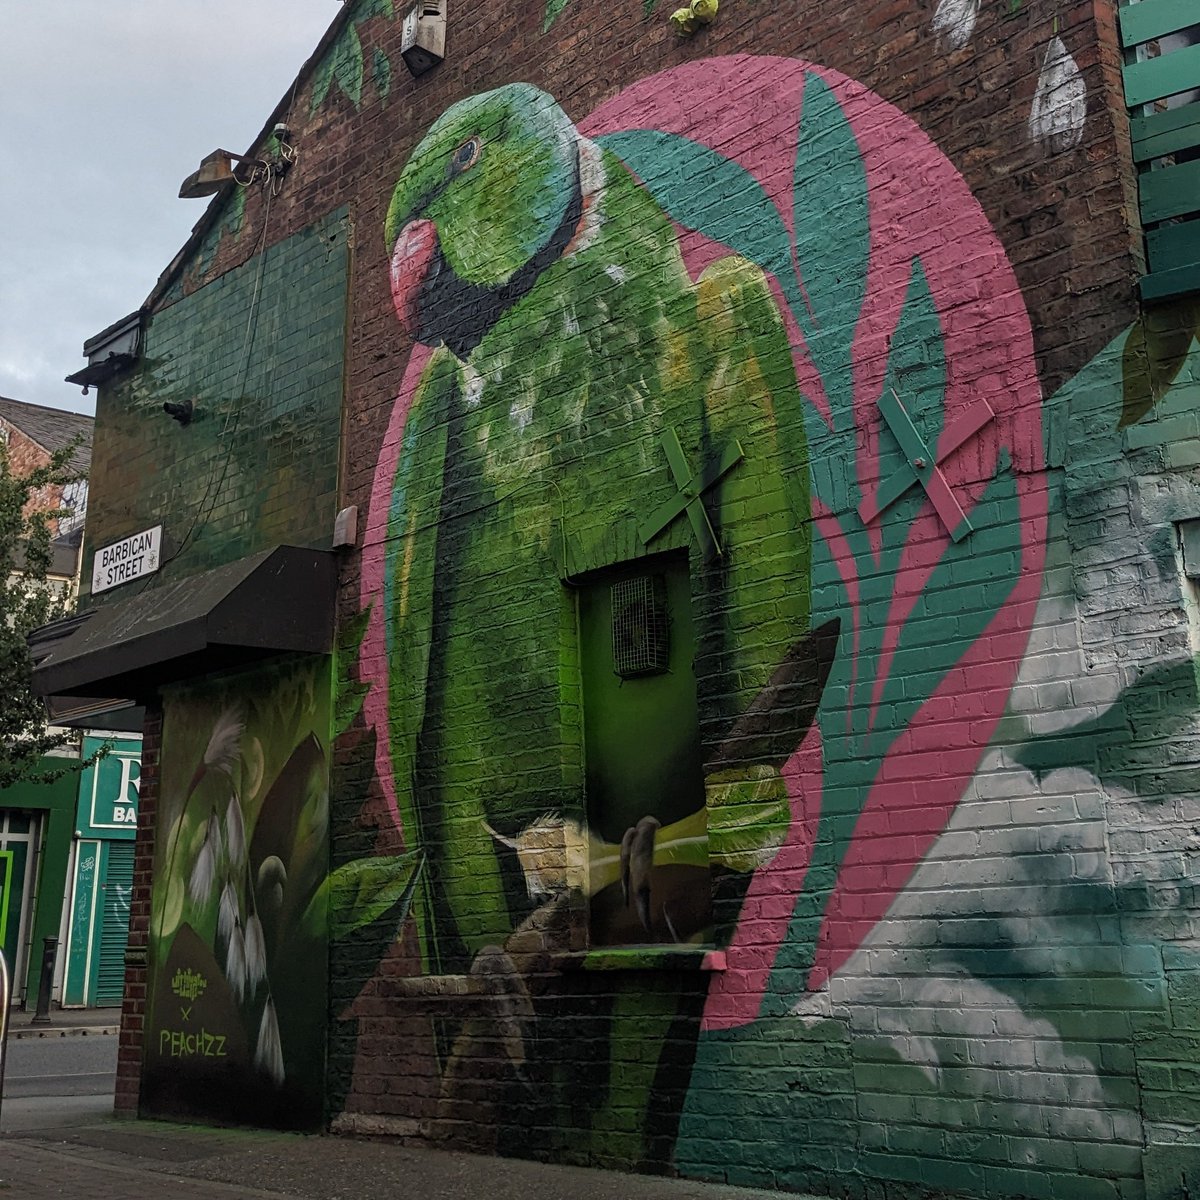 Tune into BBC The One Show tonight at 7pm for a little cameo of Withington and our parakeets mural